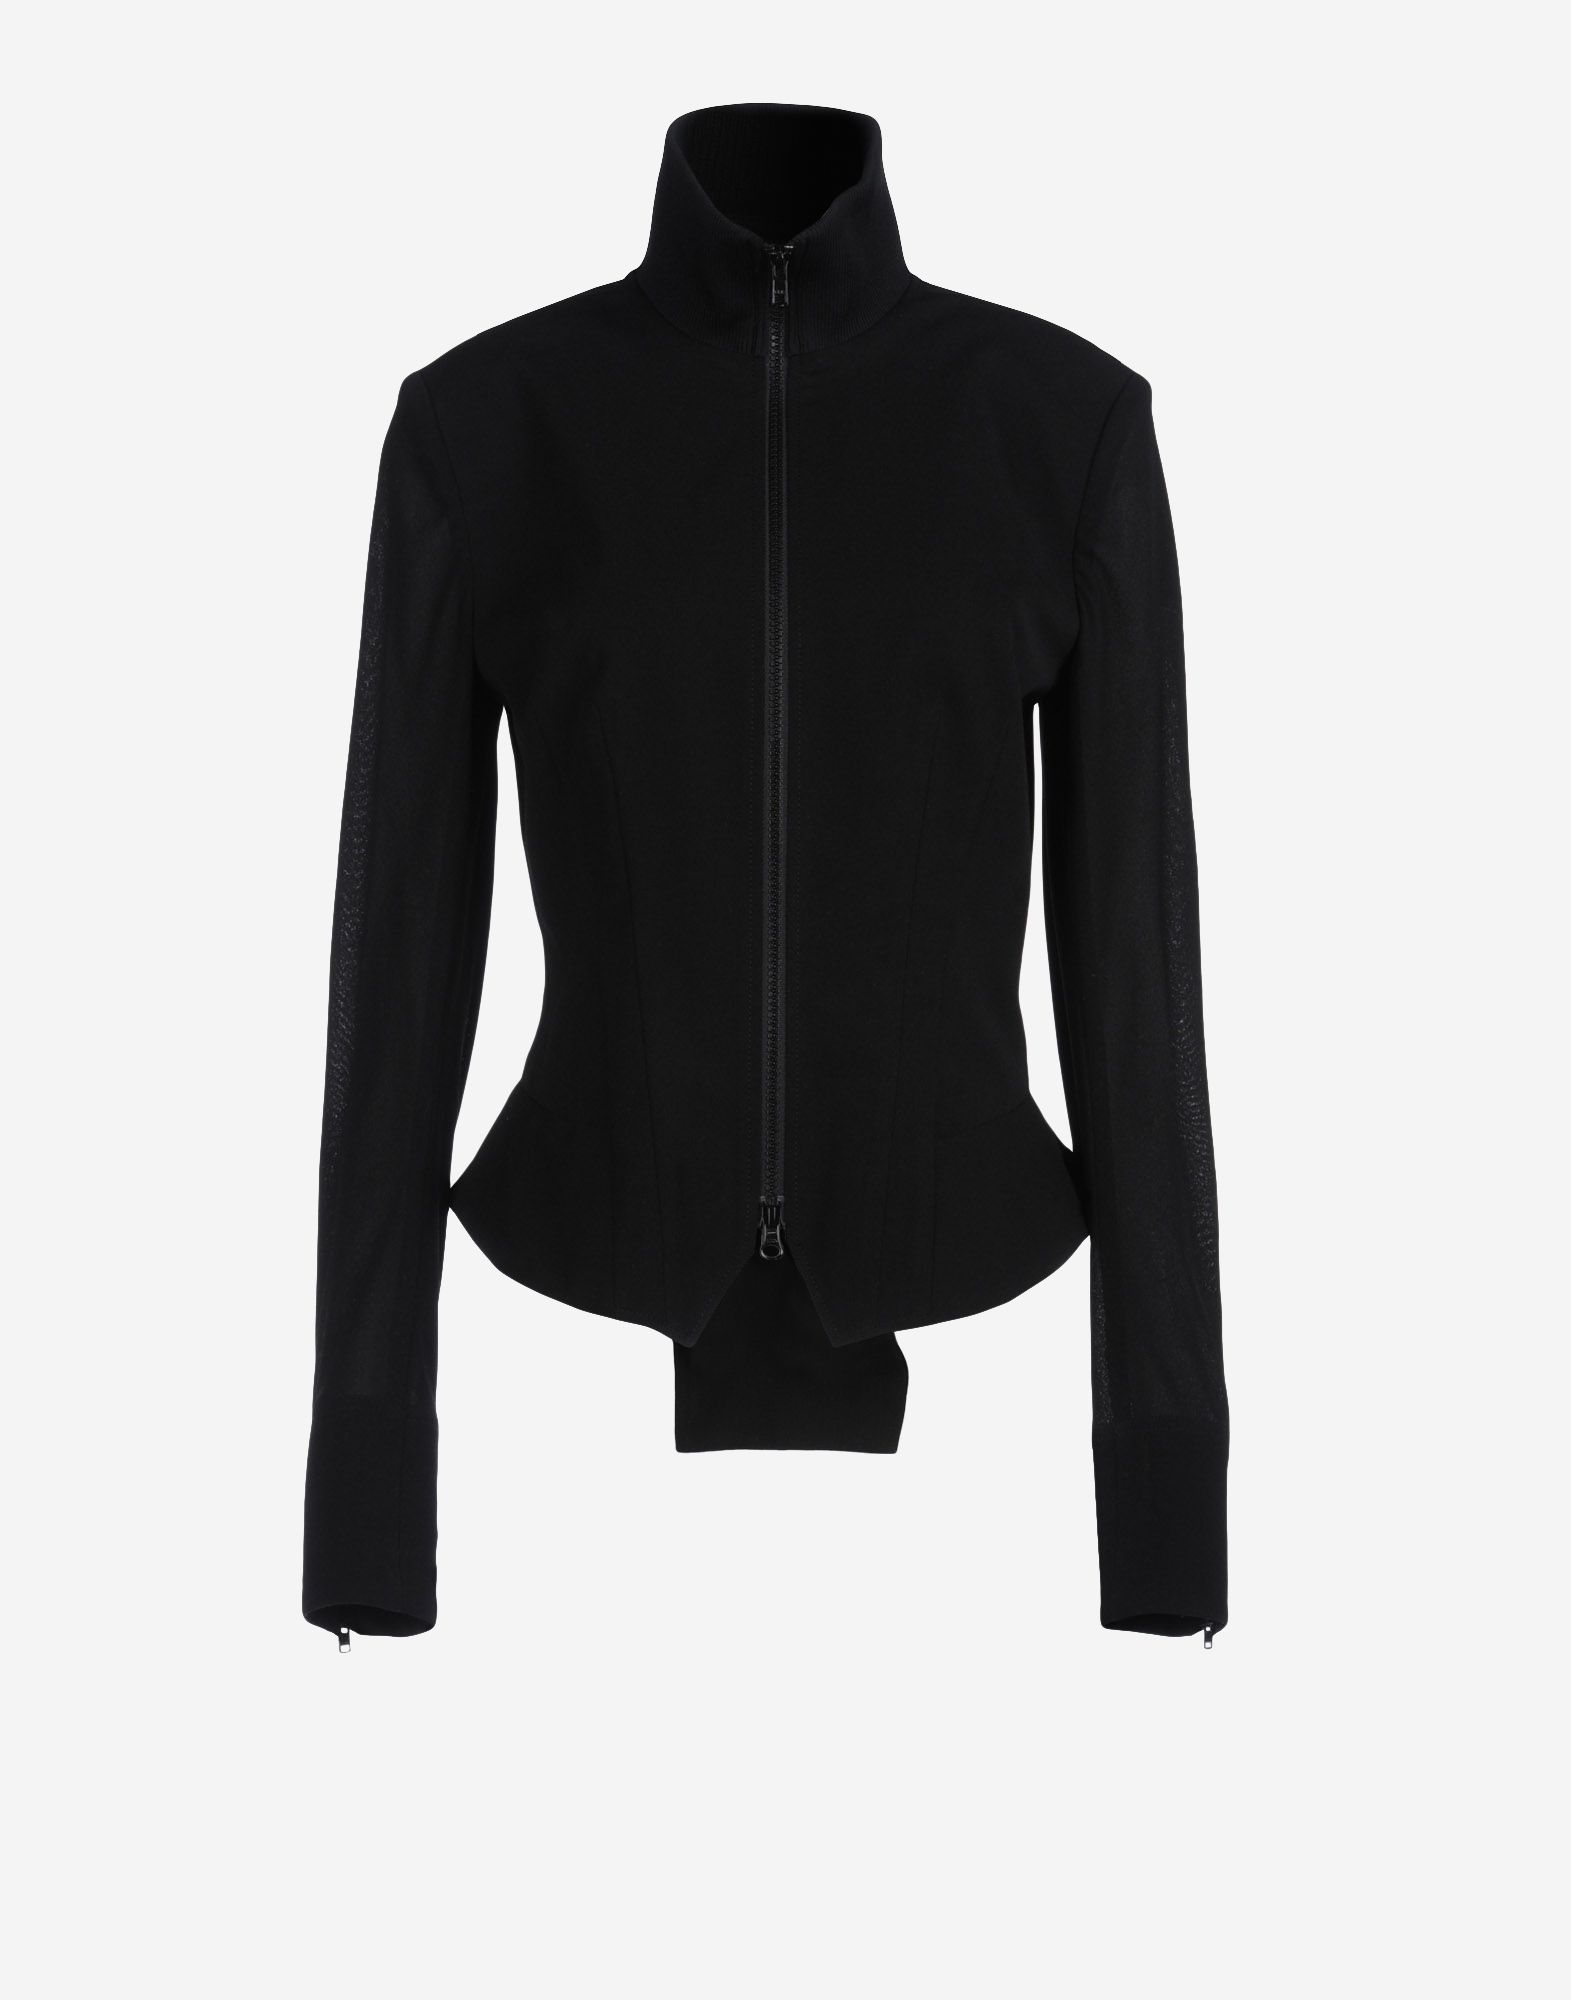 Y 3 Channel Jacket for Women | Adidas Y-3 Official Store